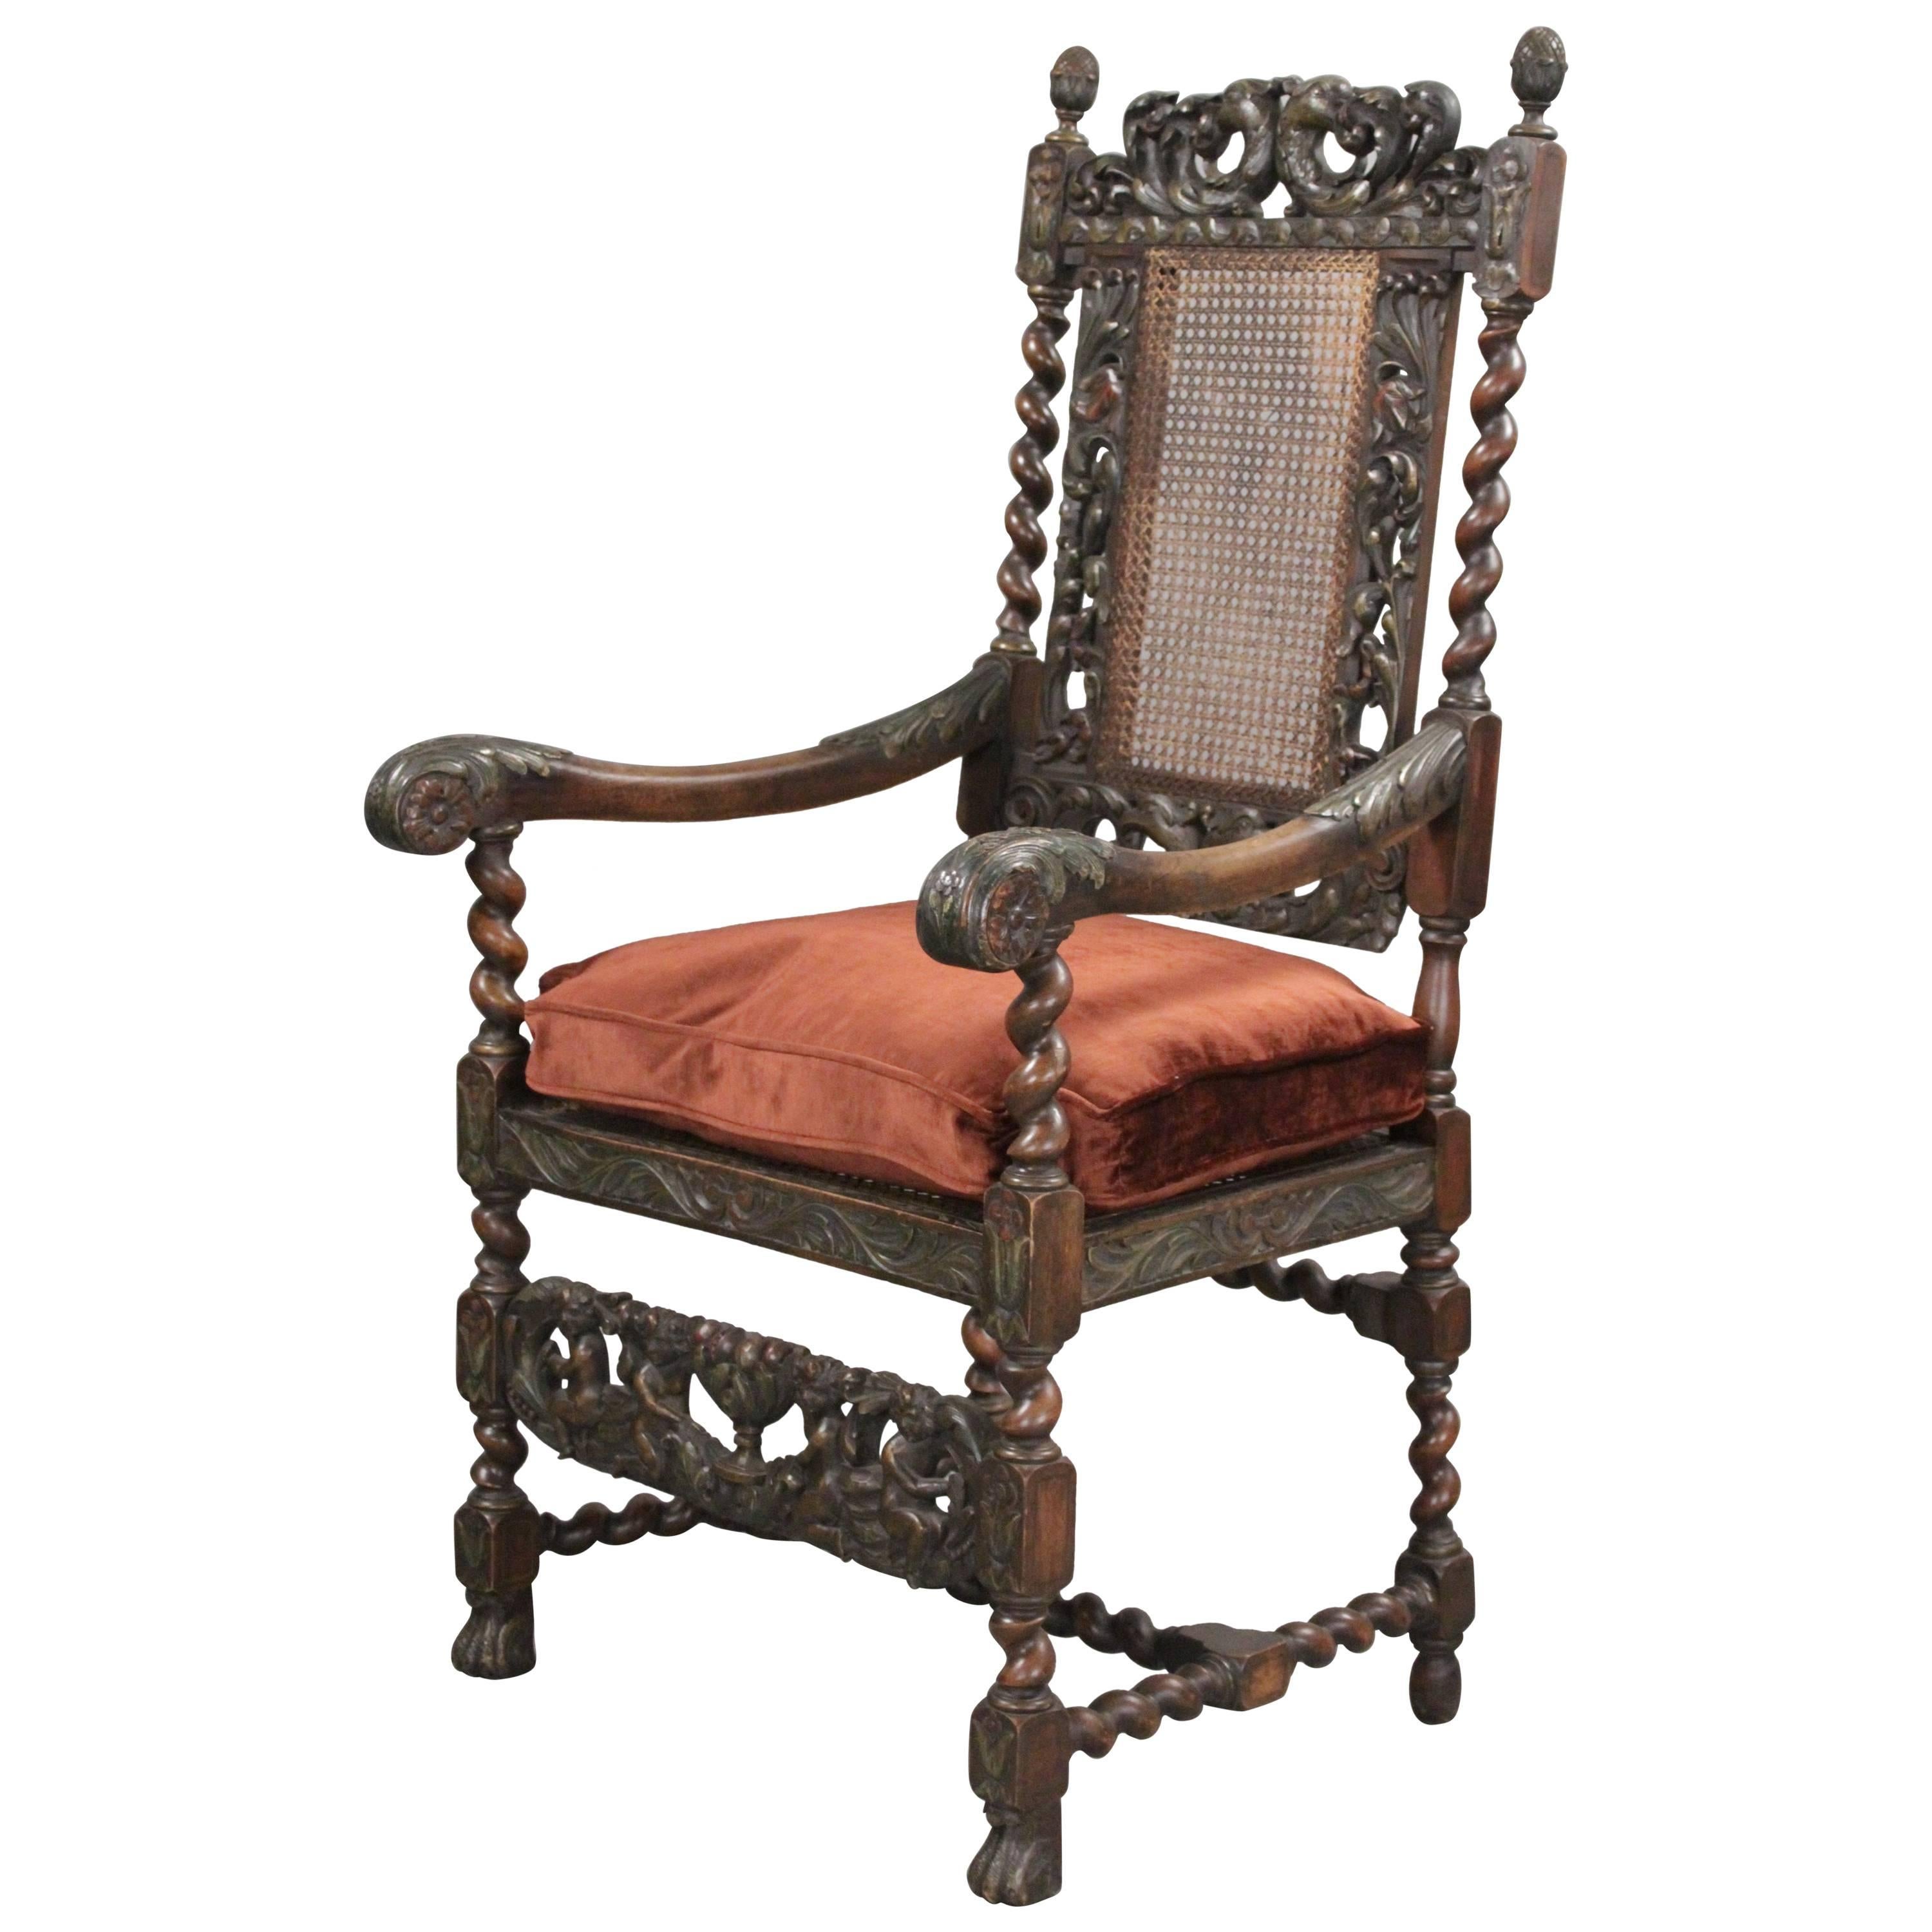 Early 1900s Carved Spanish Revival Chair with Velvet Upholstery